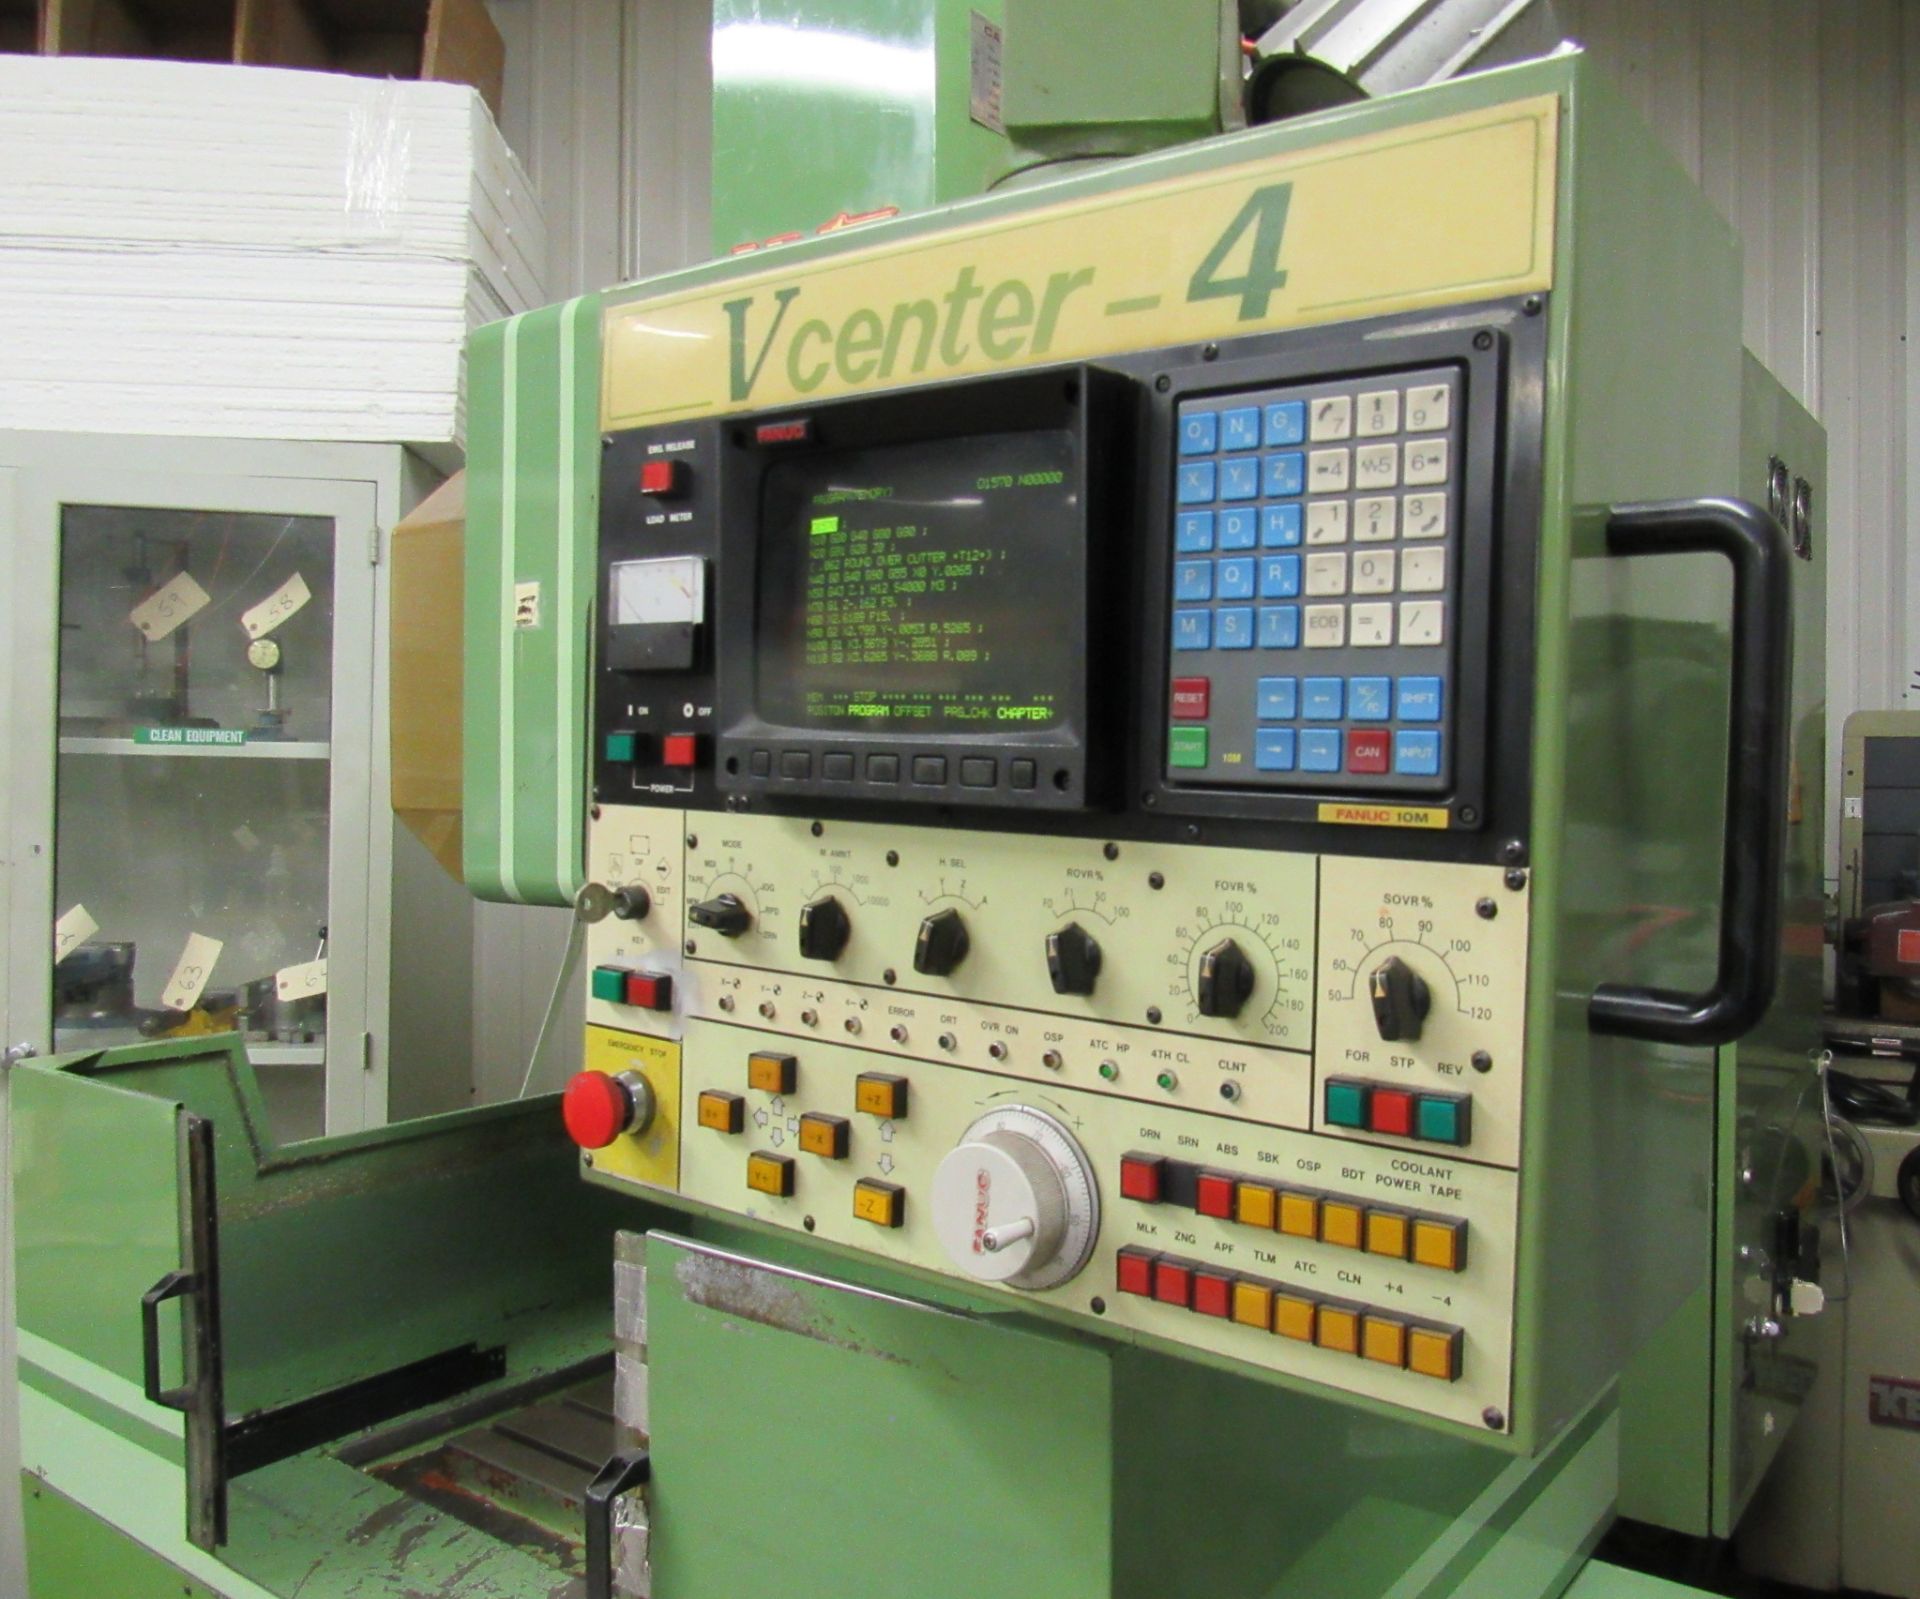 Victor Mod.V- Center 4 Vertical 3- Axis CNC Vertical Machining Center - Image 5 of 6